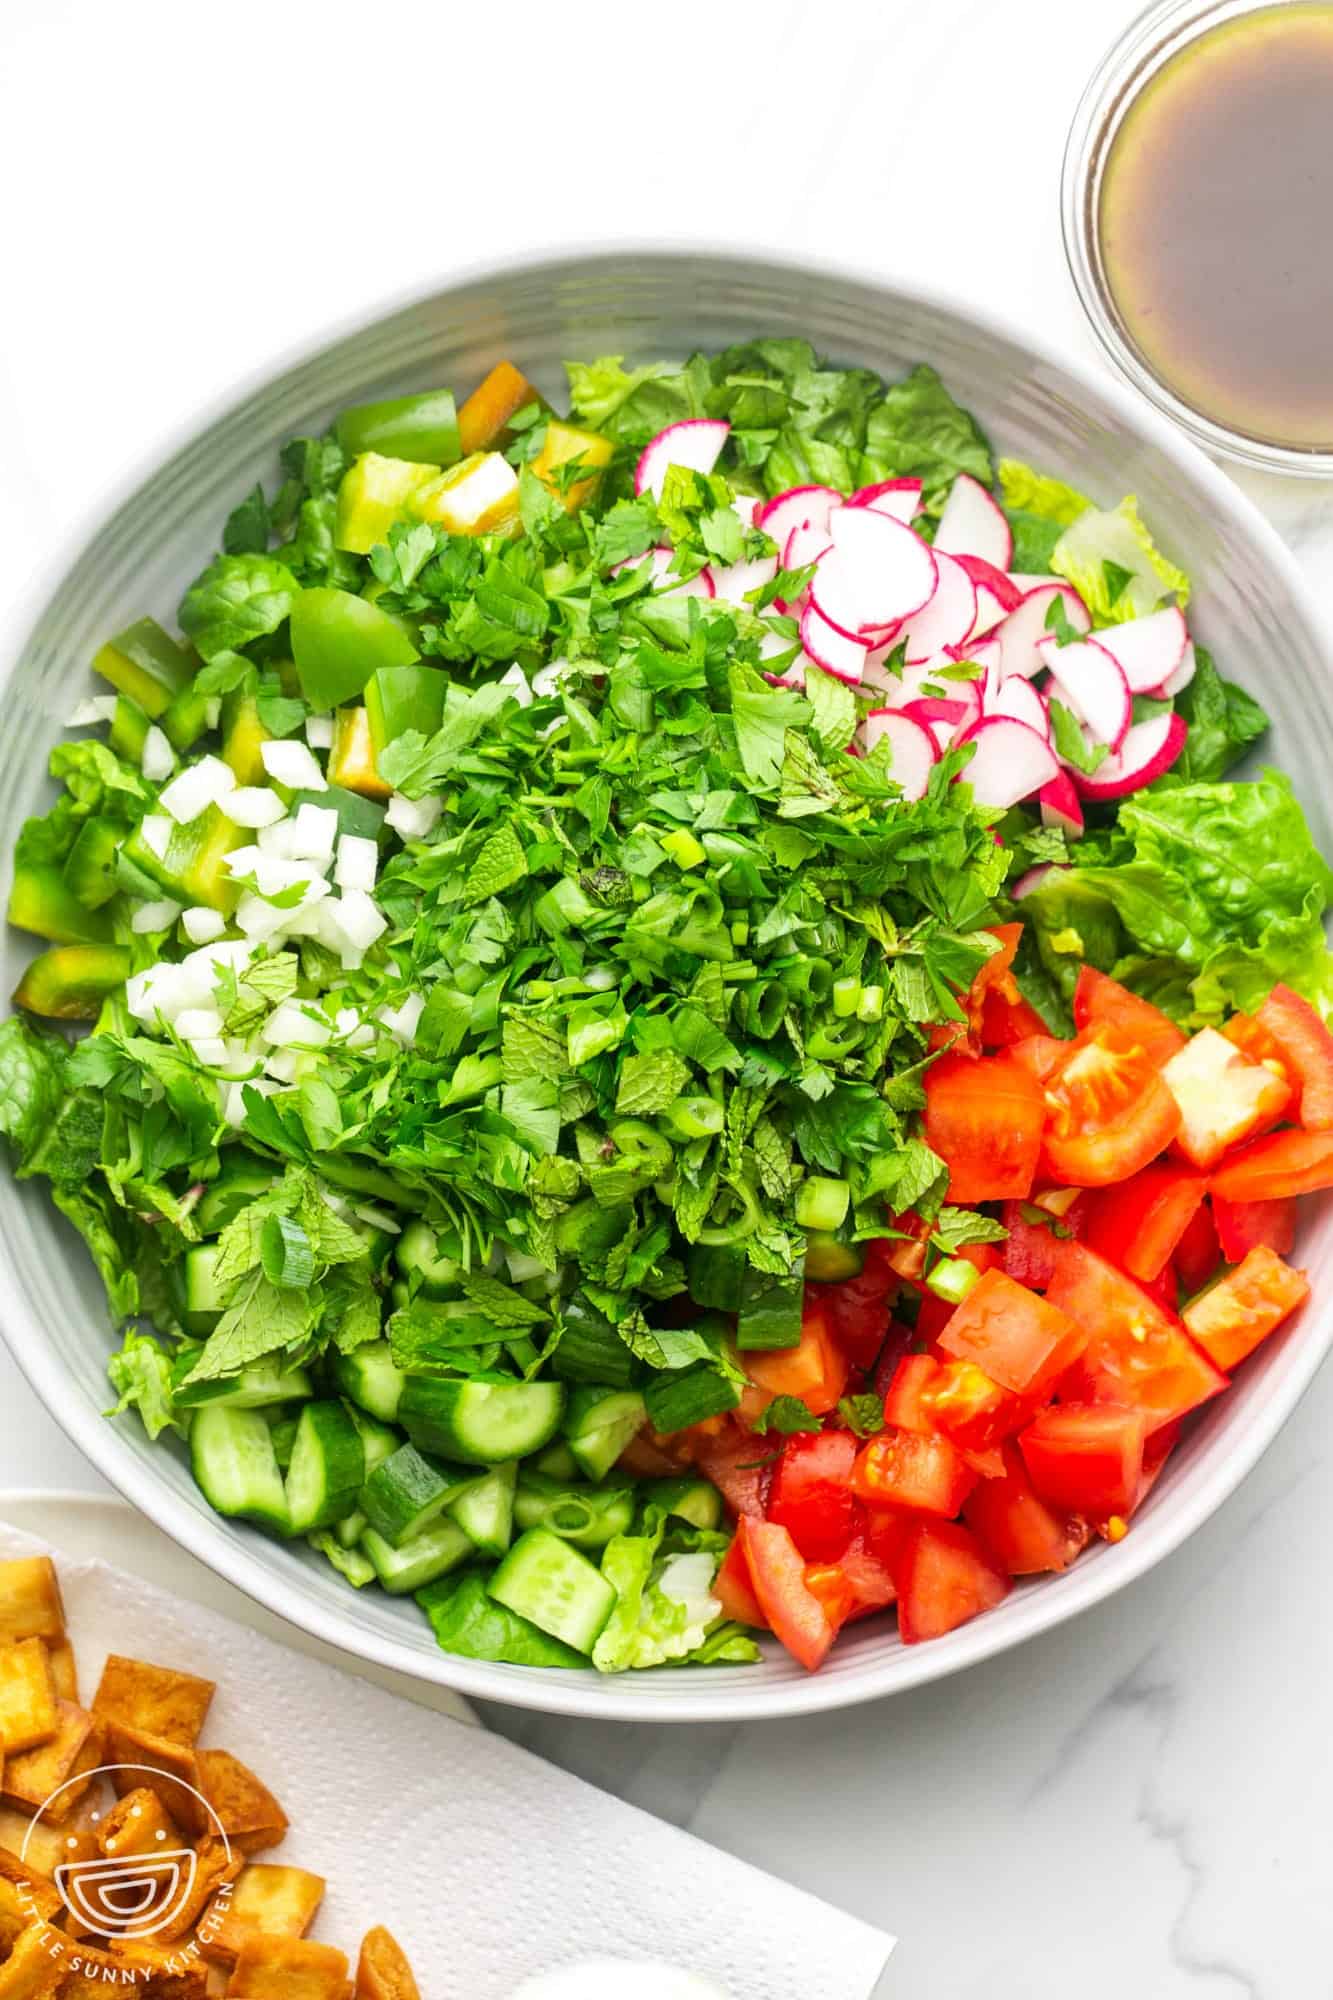 The ingredients for fattoush salad, loaded into a large bowl.